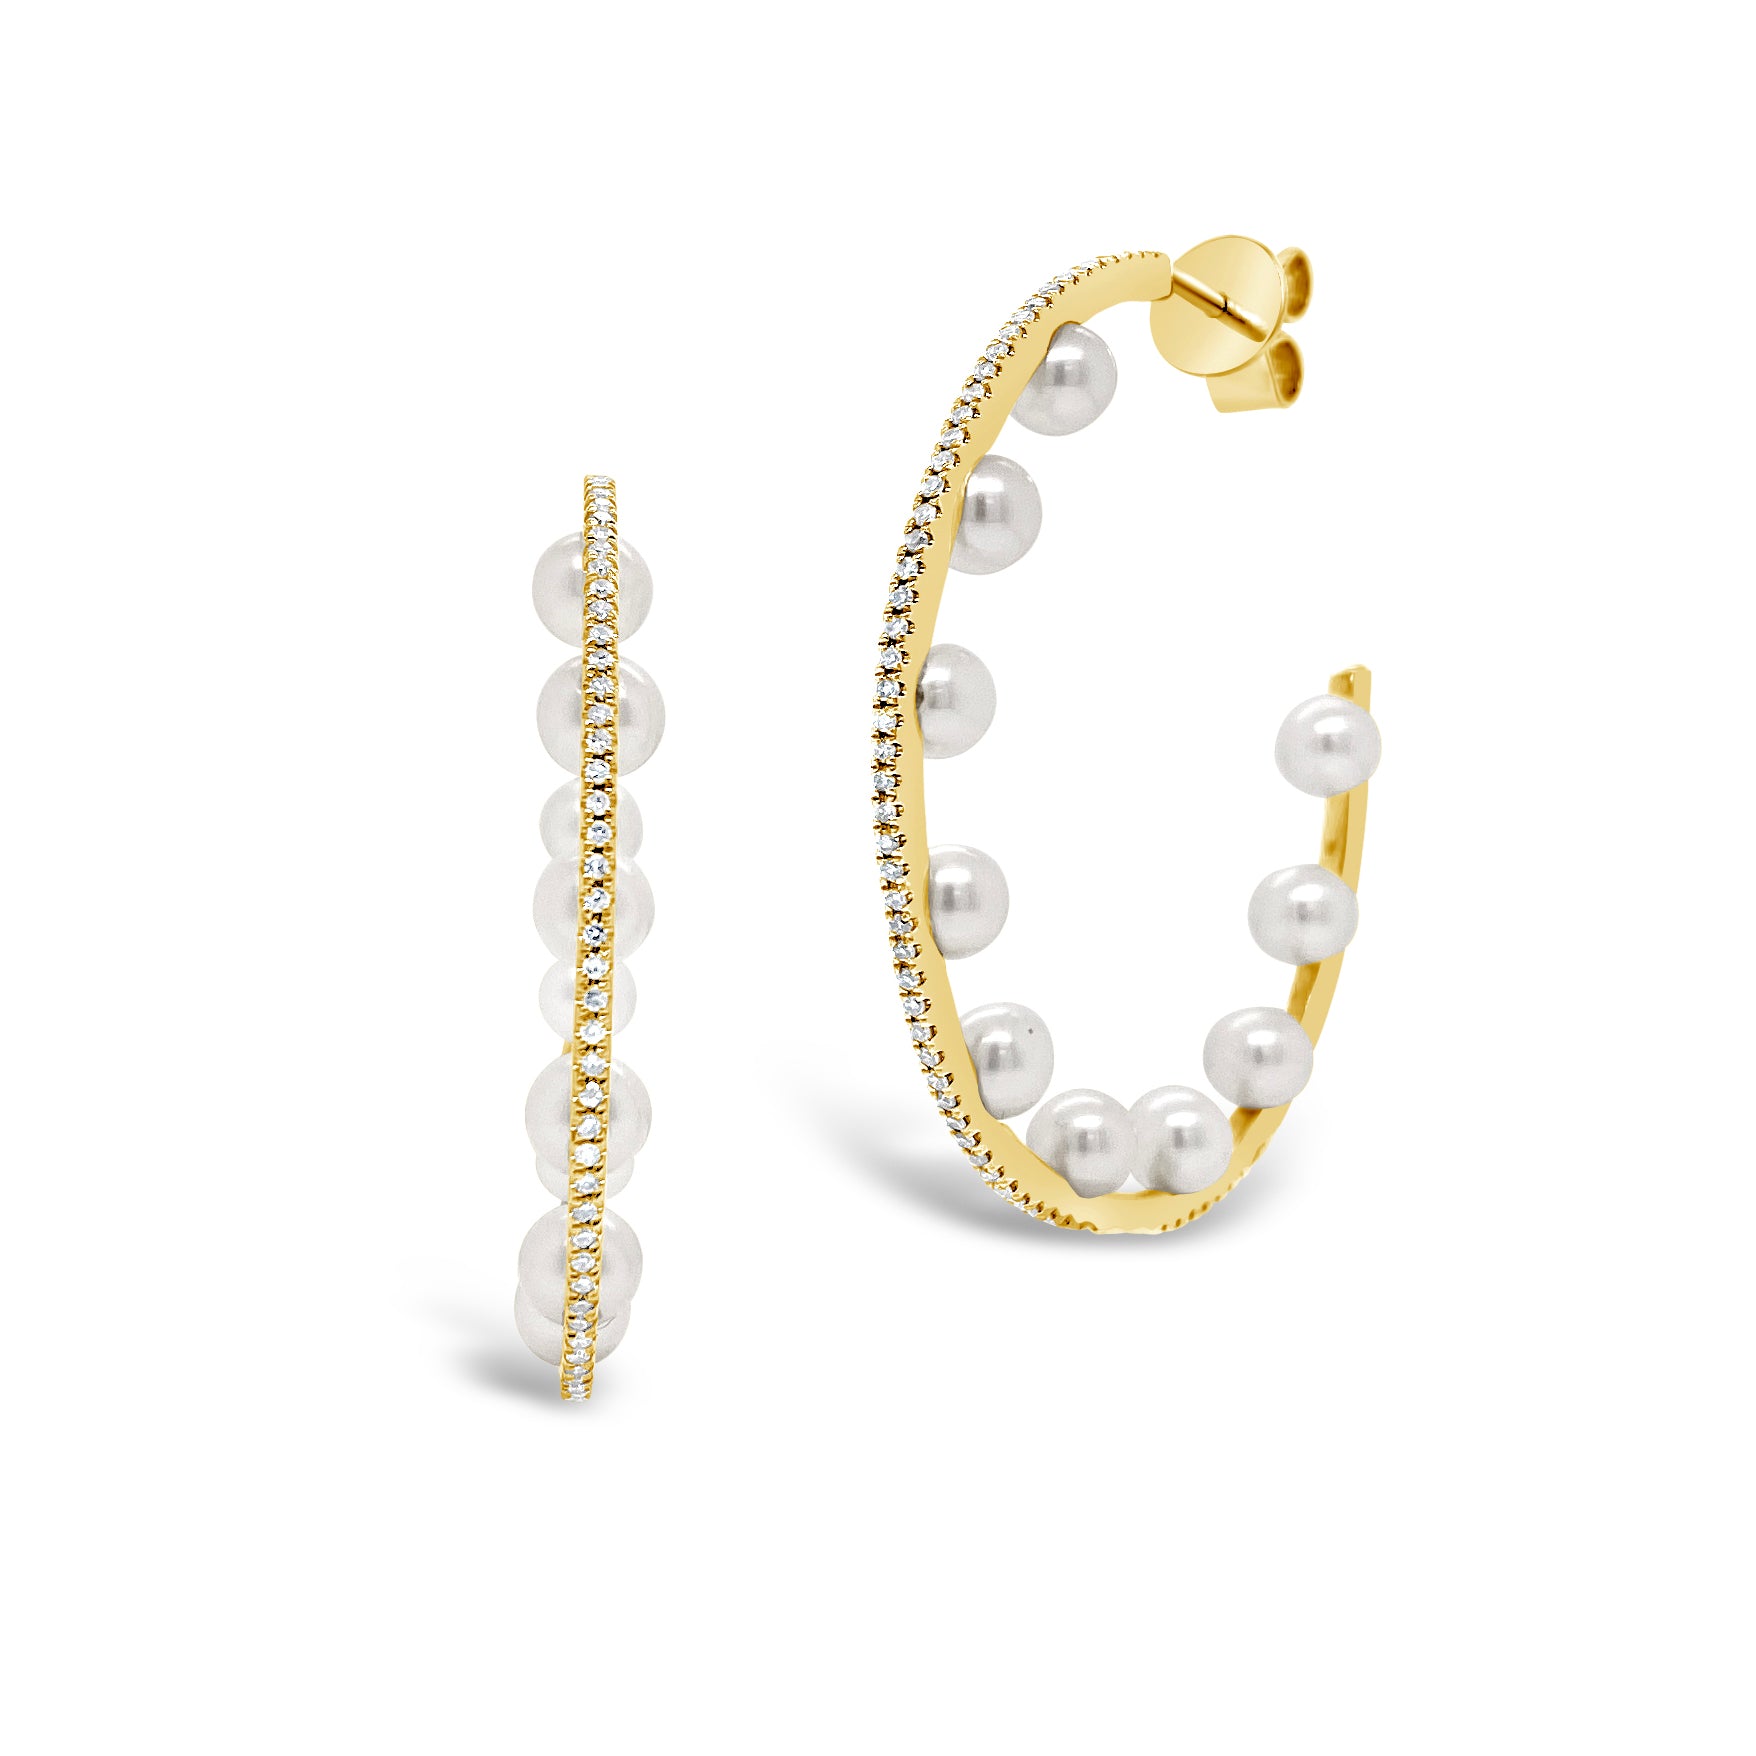 gold earrings with diamonds on white background